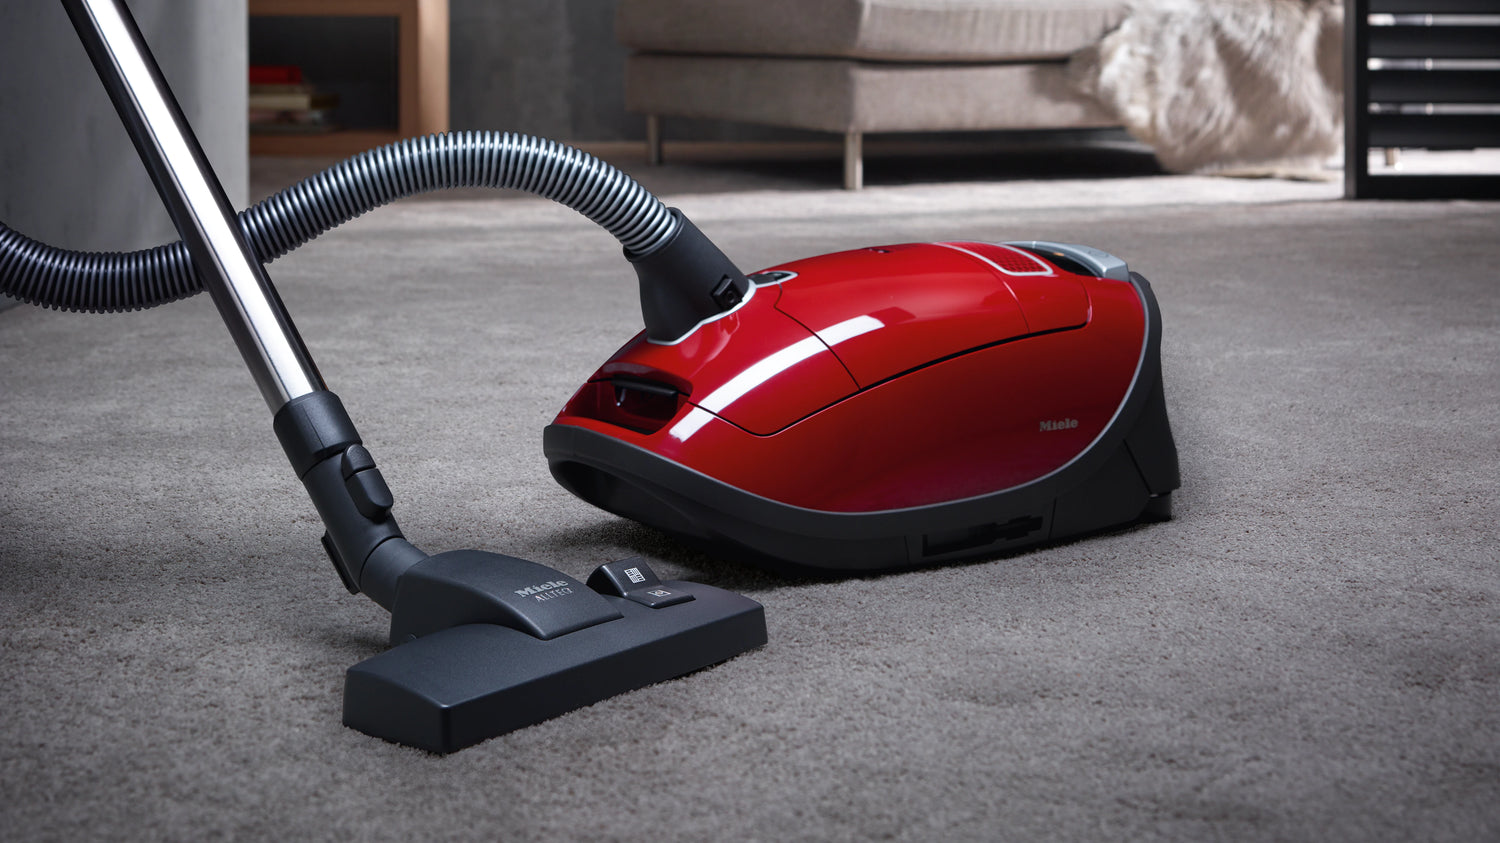 Red Miele Vacuum Cleaner with carpet and floor attachment